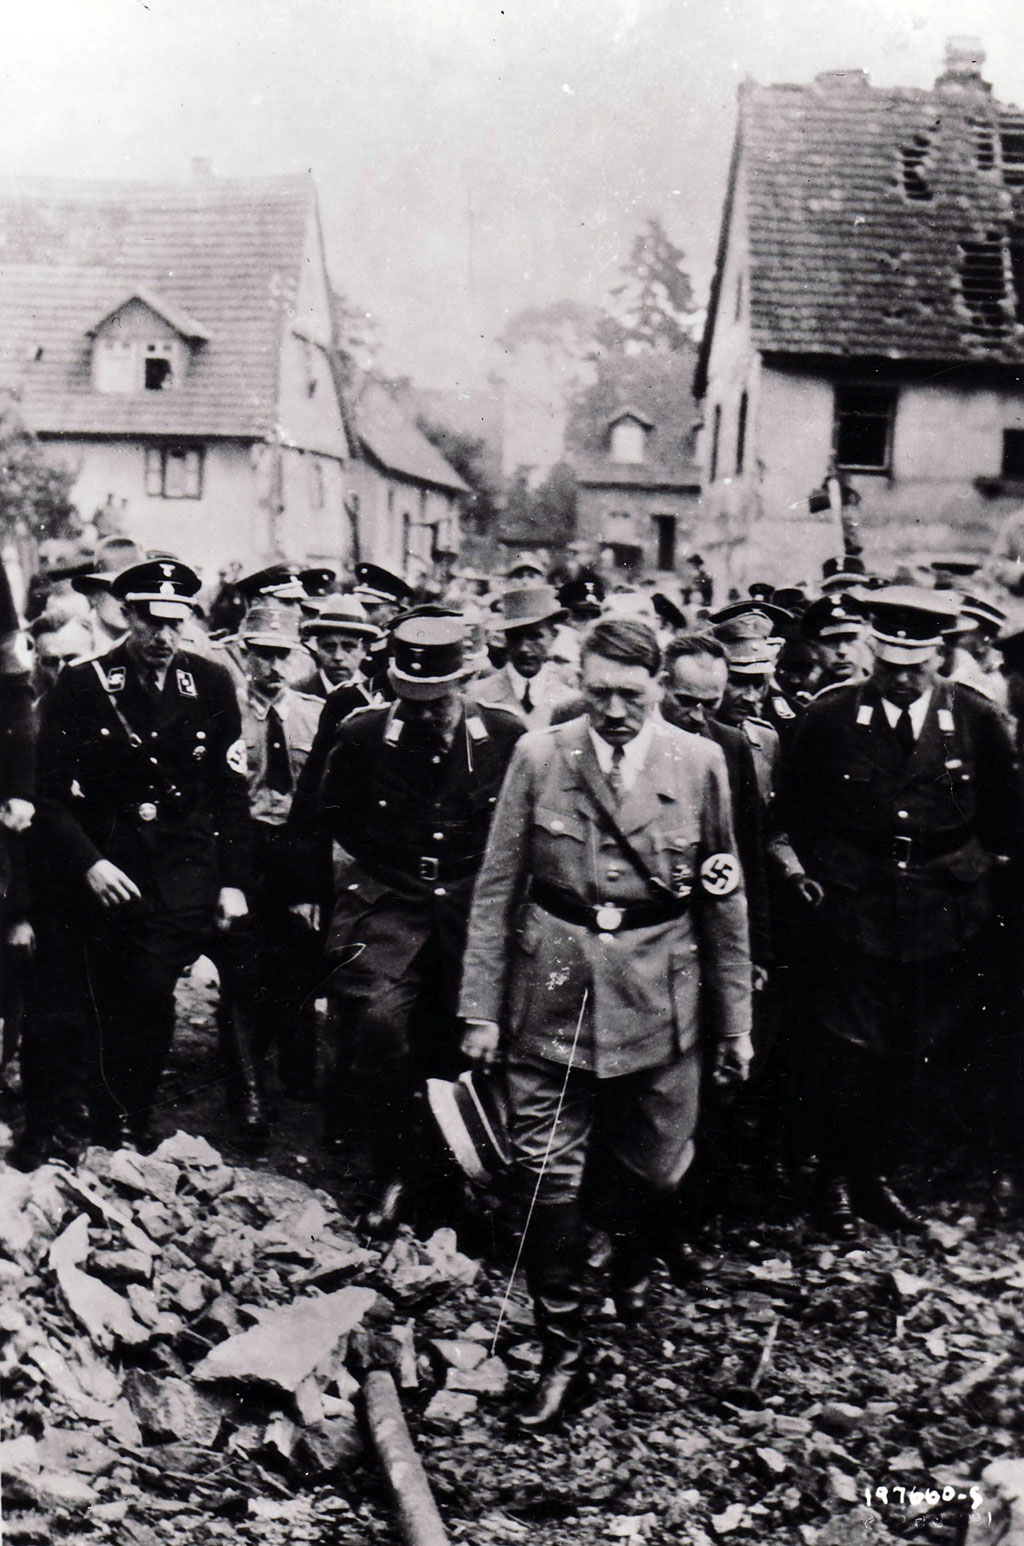 Adolf Hitler examines wreckage in an undated German photo captured by the U.S. Army on the Western front. For the first and only time since the Germans overran Paris four years earlier, the Führer in mid-June of 1944 would return to France to confer with his commanders in Margival about the Allied invasion.